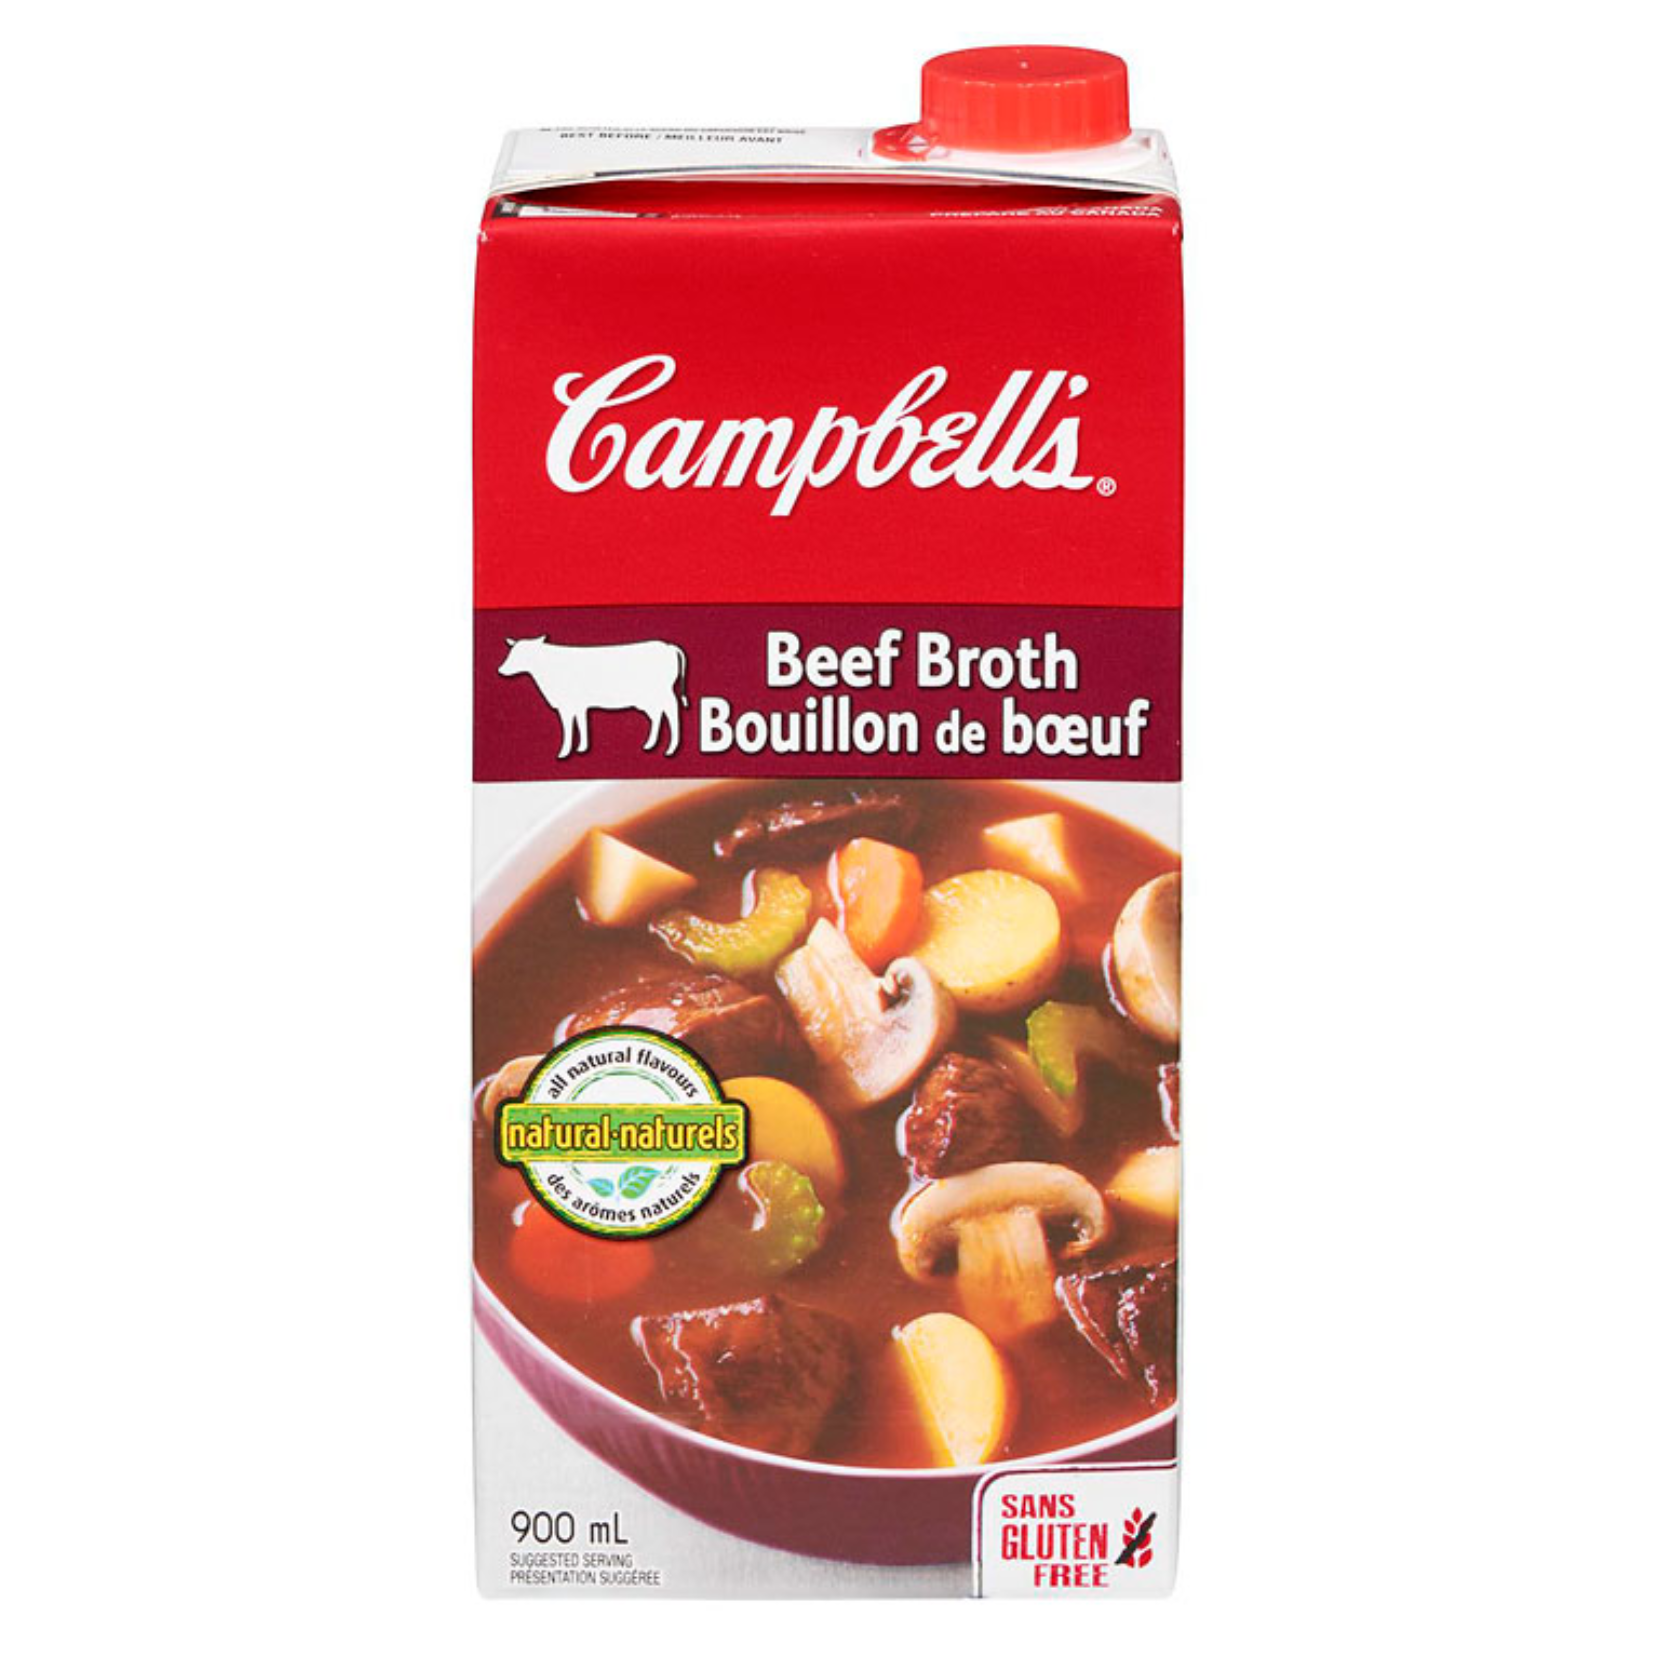 Campbell's Beef Broth 900ml